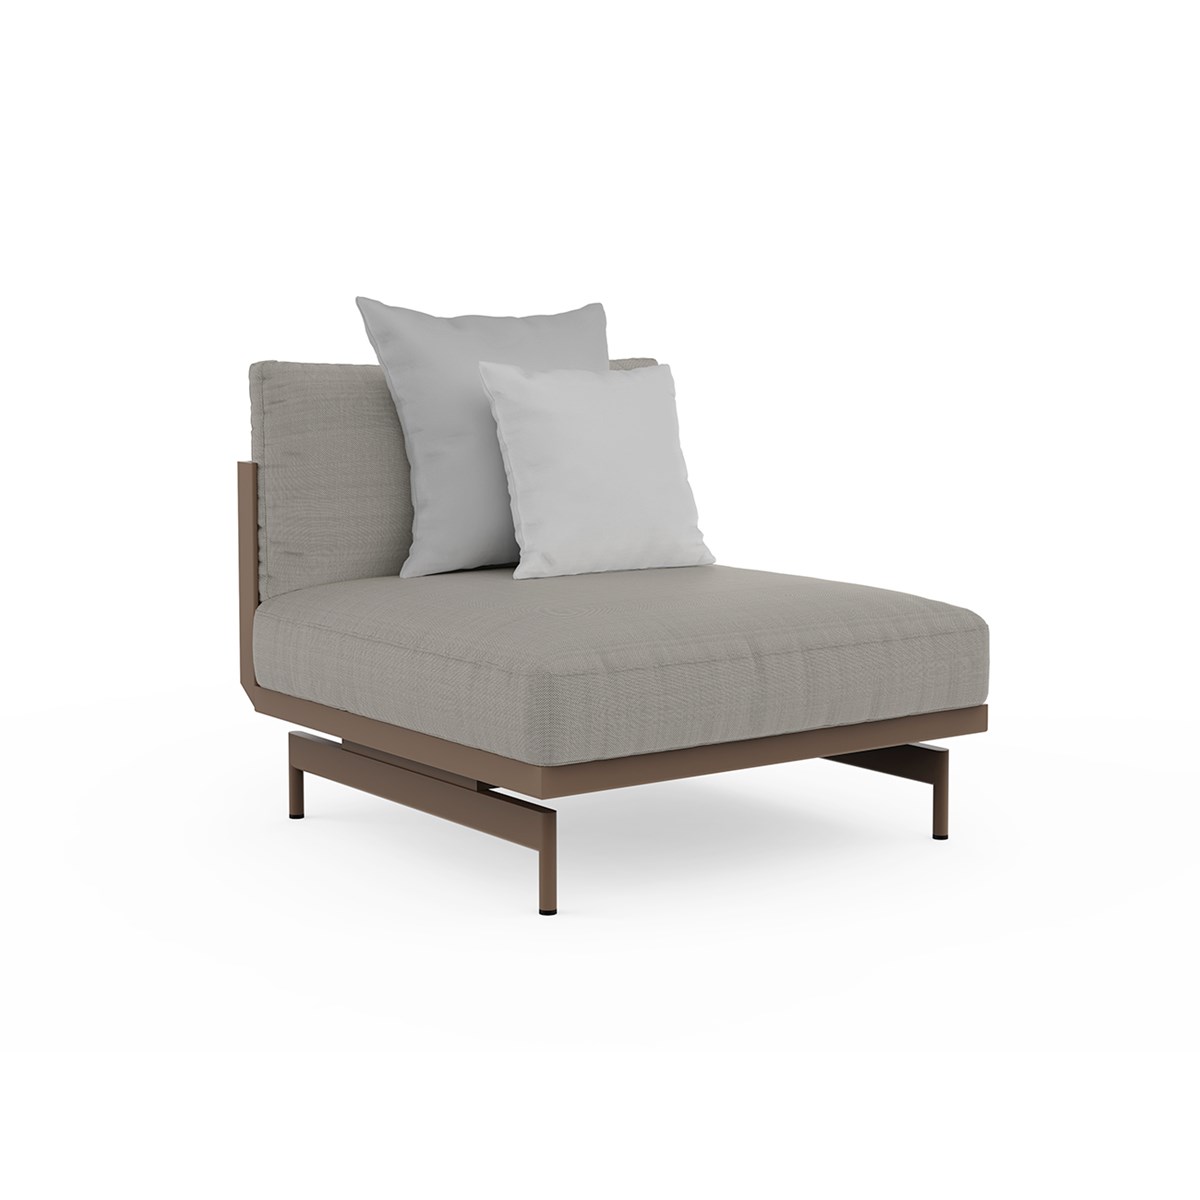 Onde Sectional 3 Bronze Product Image